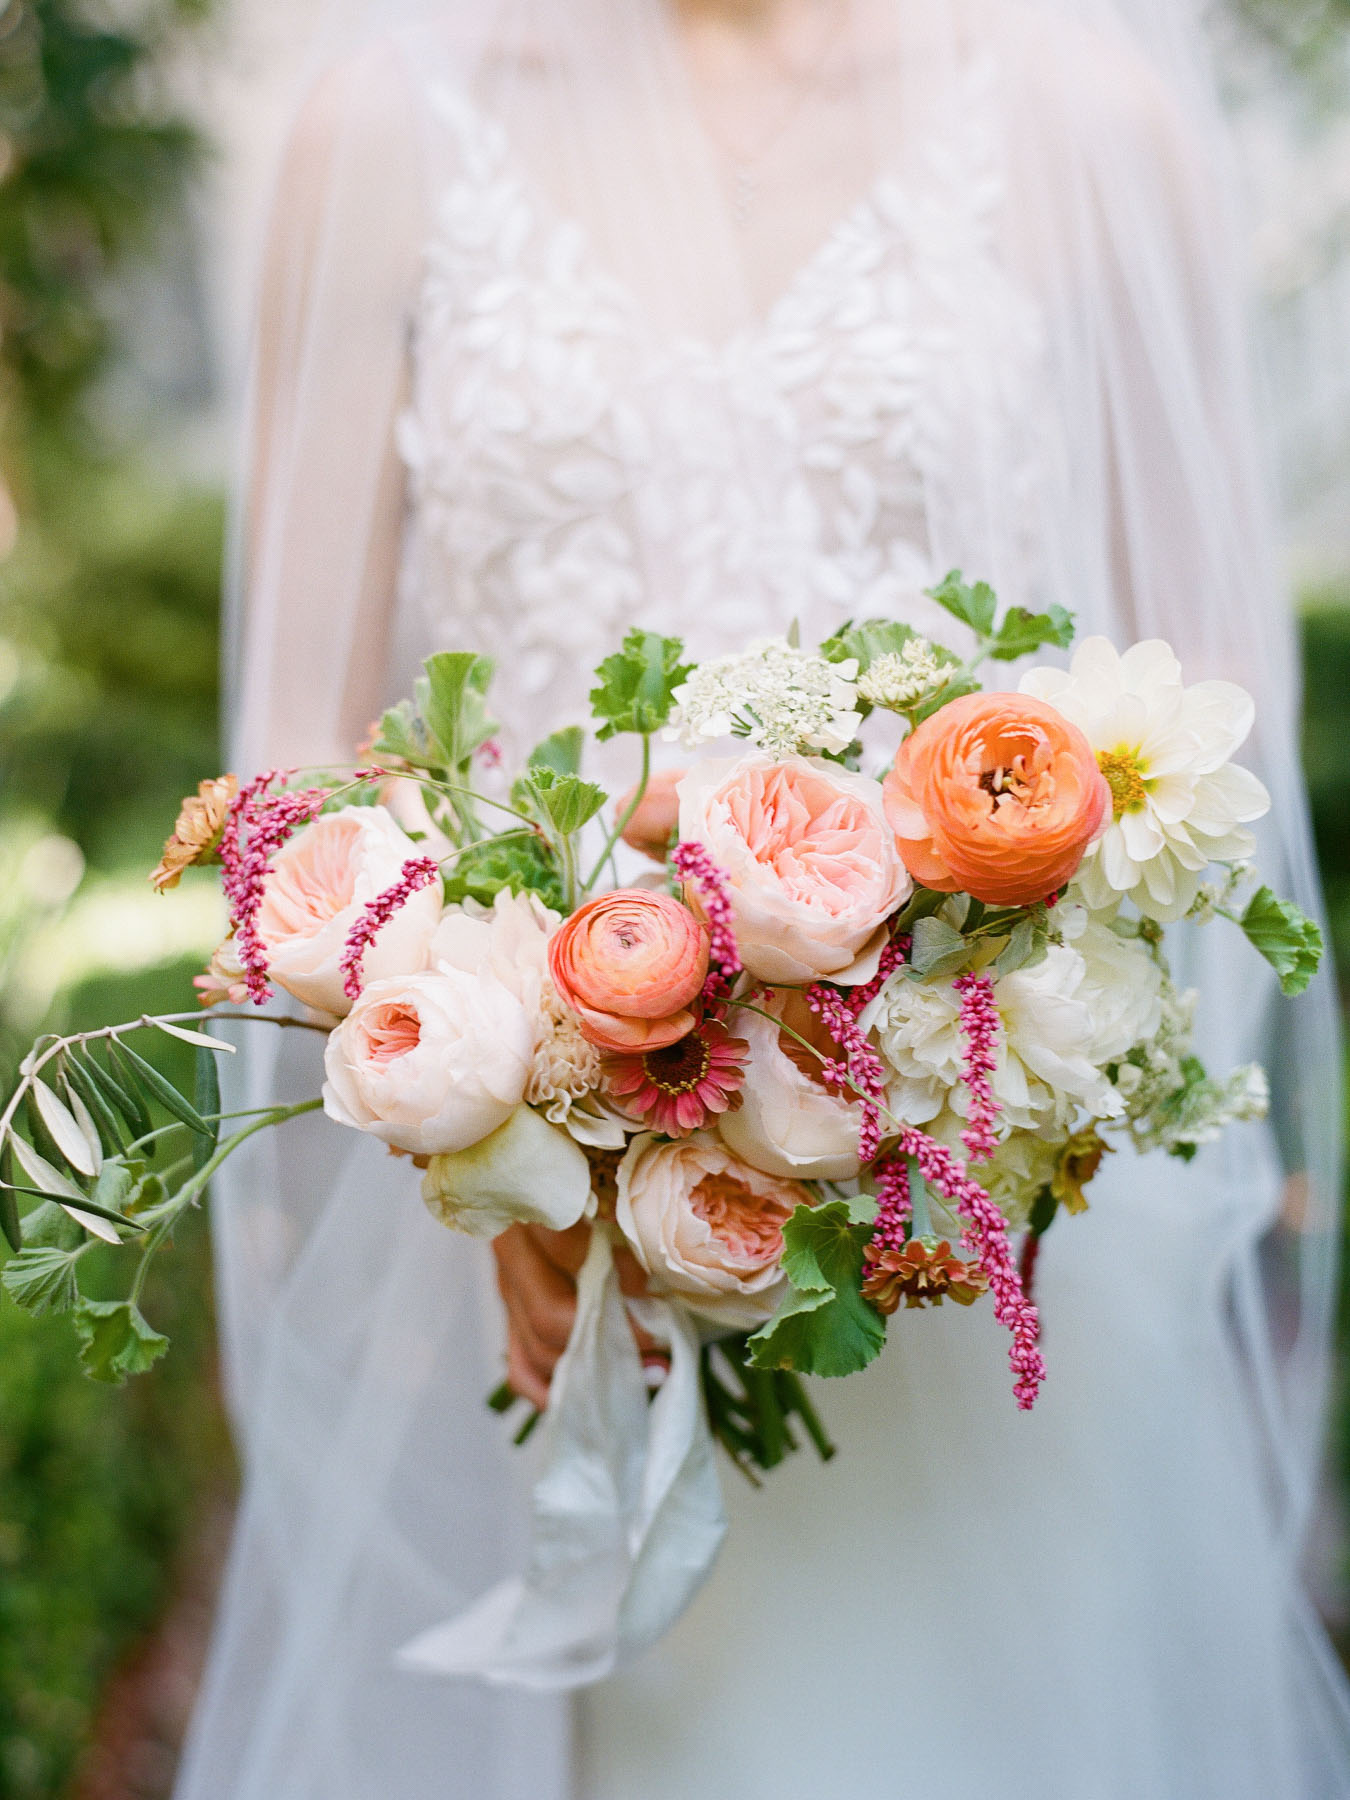 Brightly colored bridal bouquet with whites, corals, soft pinks, and greens.